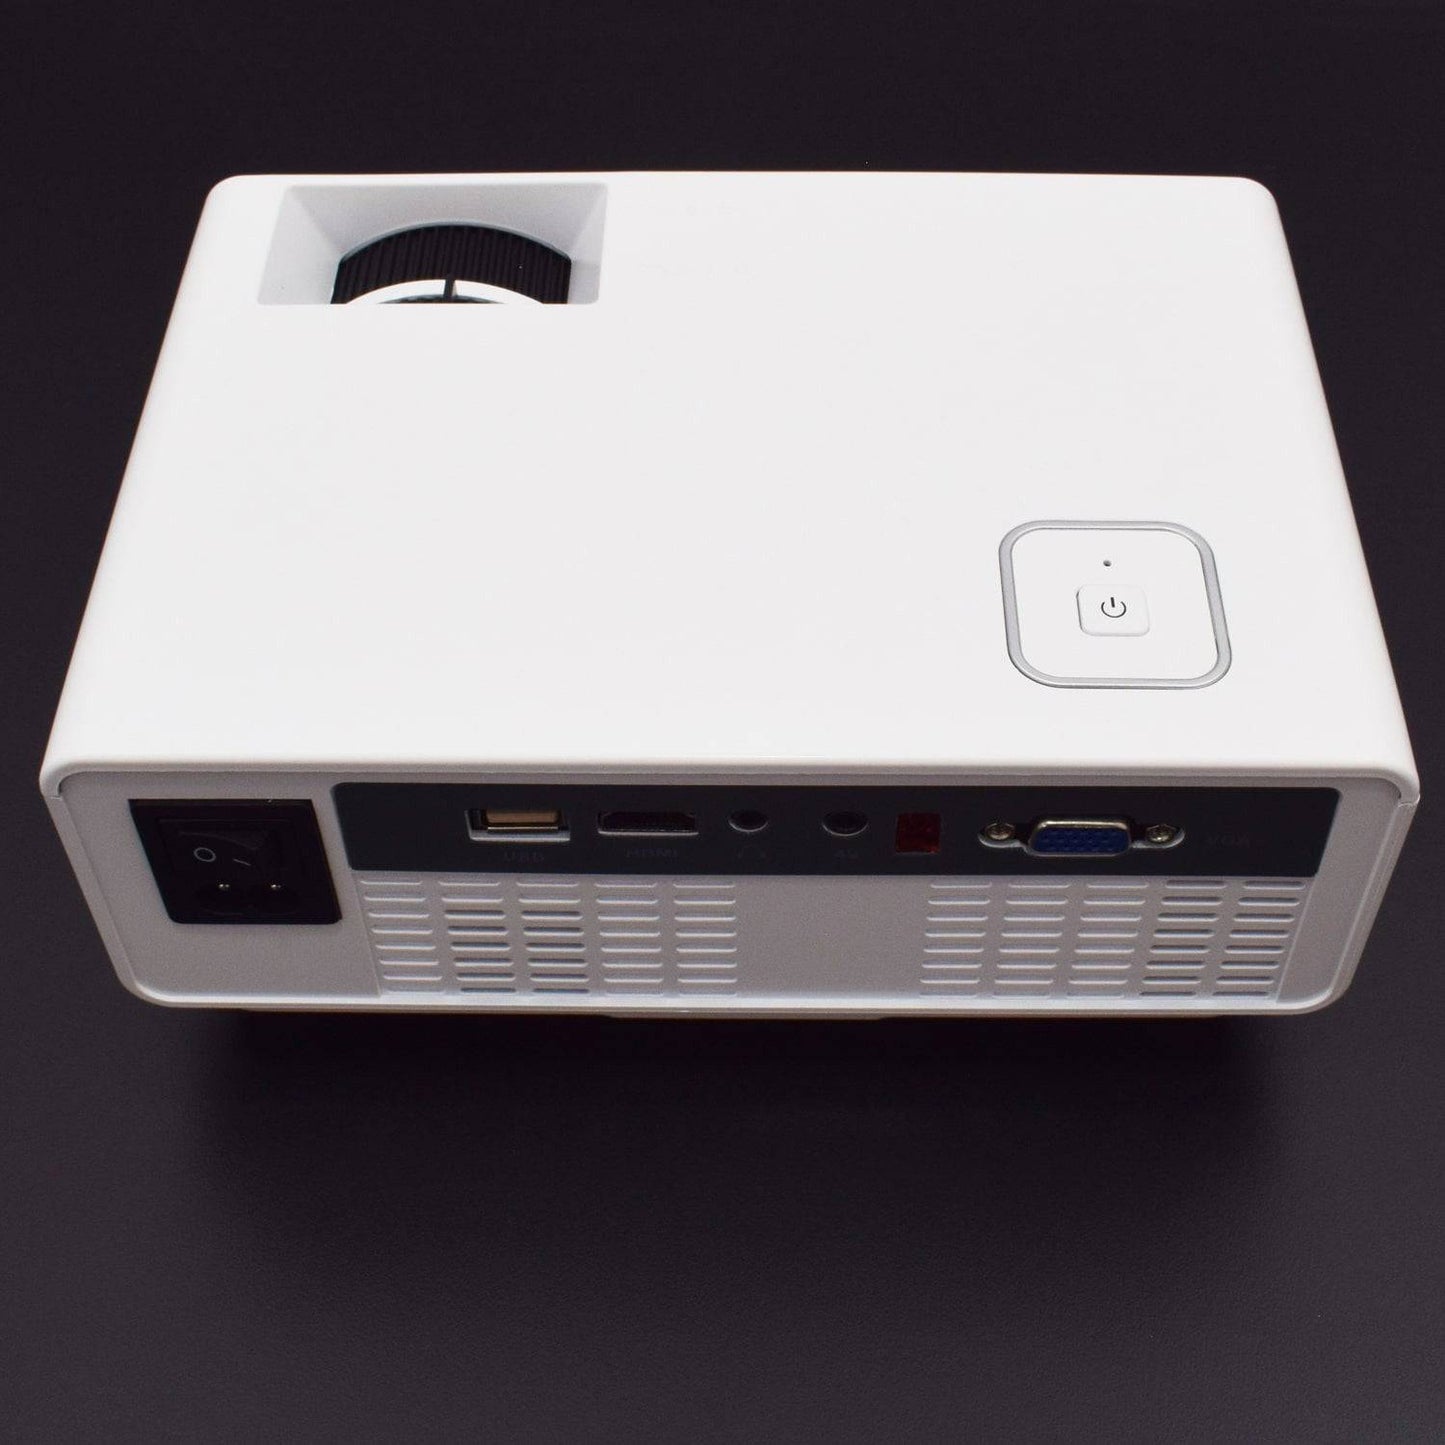 Projector, RD-810 Mini LED Video Projector Supporting 1080P, HDMI, USB, VGA, AV for Home Cinema, TVs, Laptops - RS936 - REES52